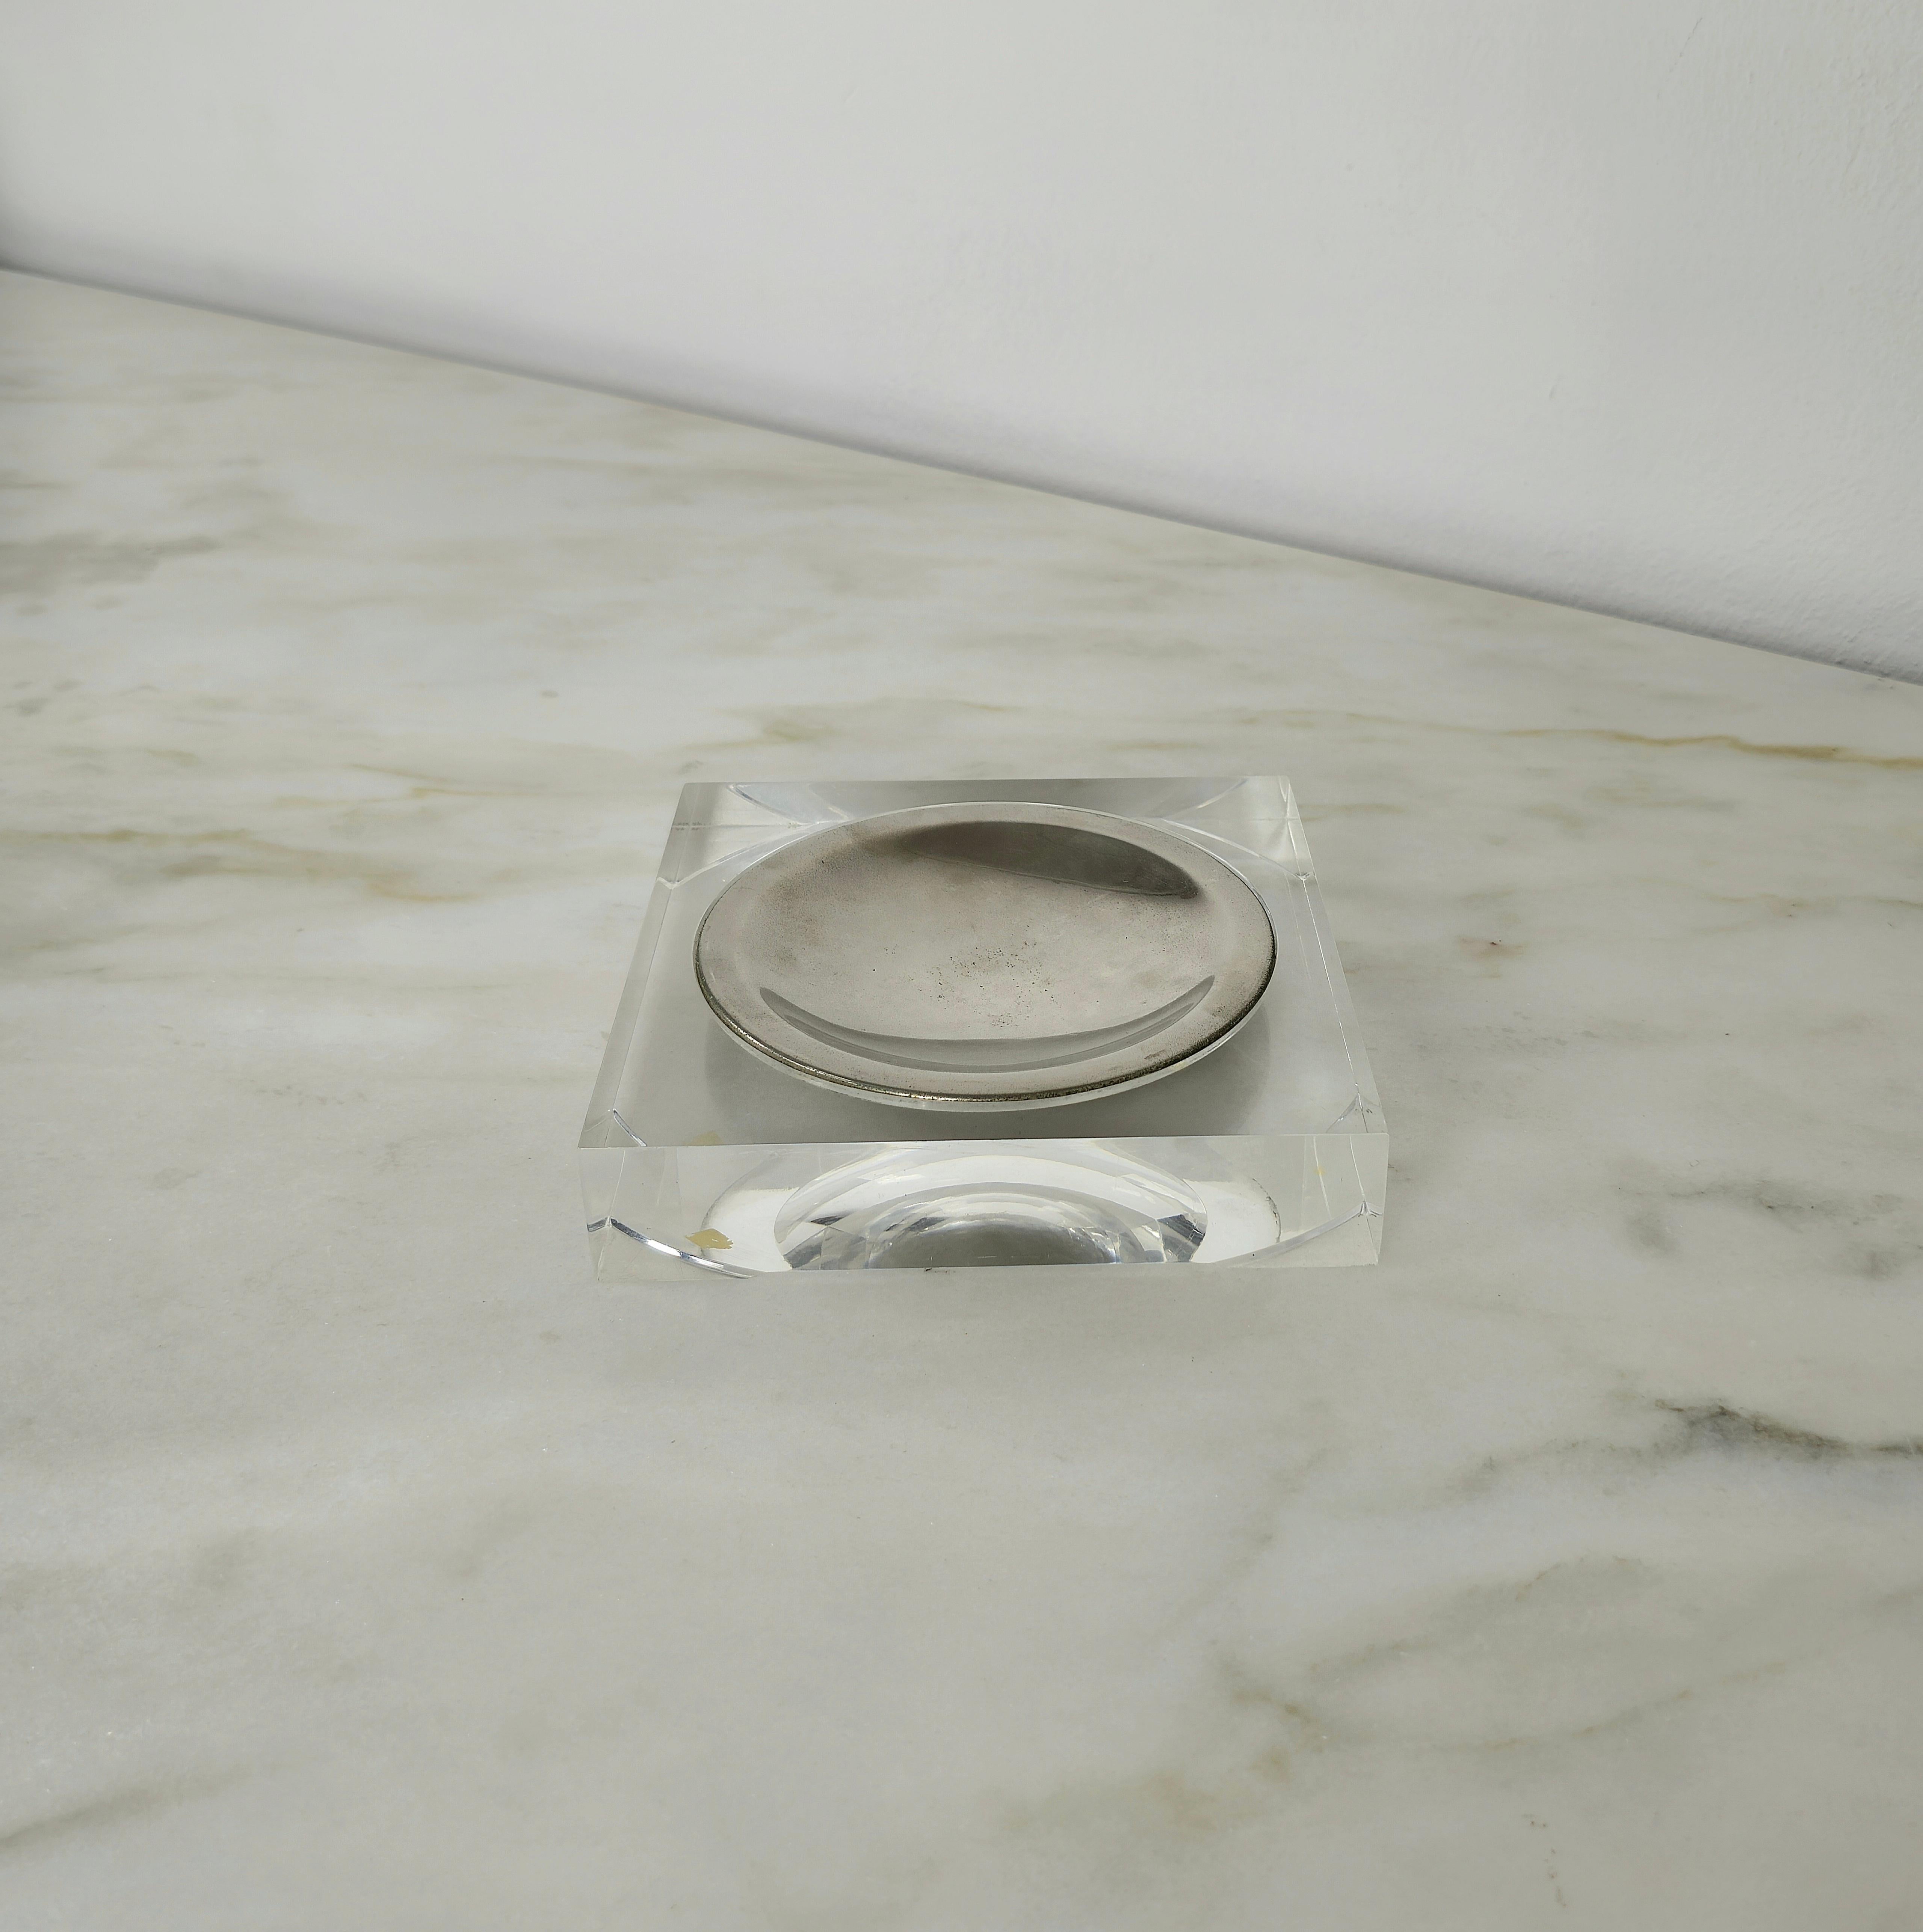 Vide-poche produced in the 70s by the famous Christian Dior clothing and accessories house.
The square-shaped pocket emptier was made in lucite with the underlying corners in relief, as if they were feet. concave central plate in chromed